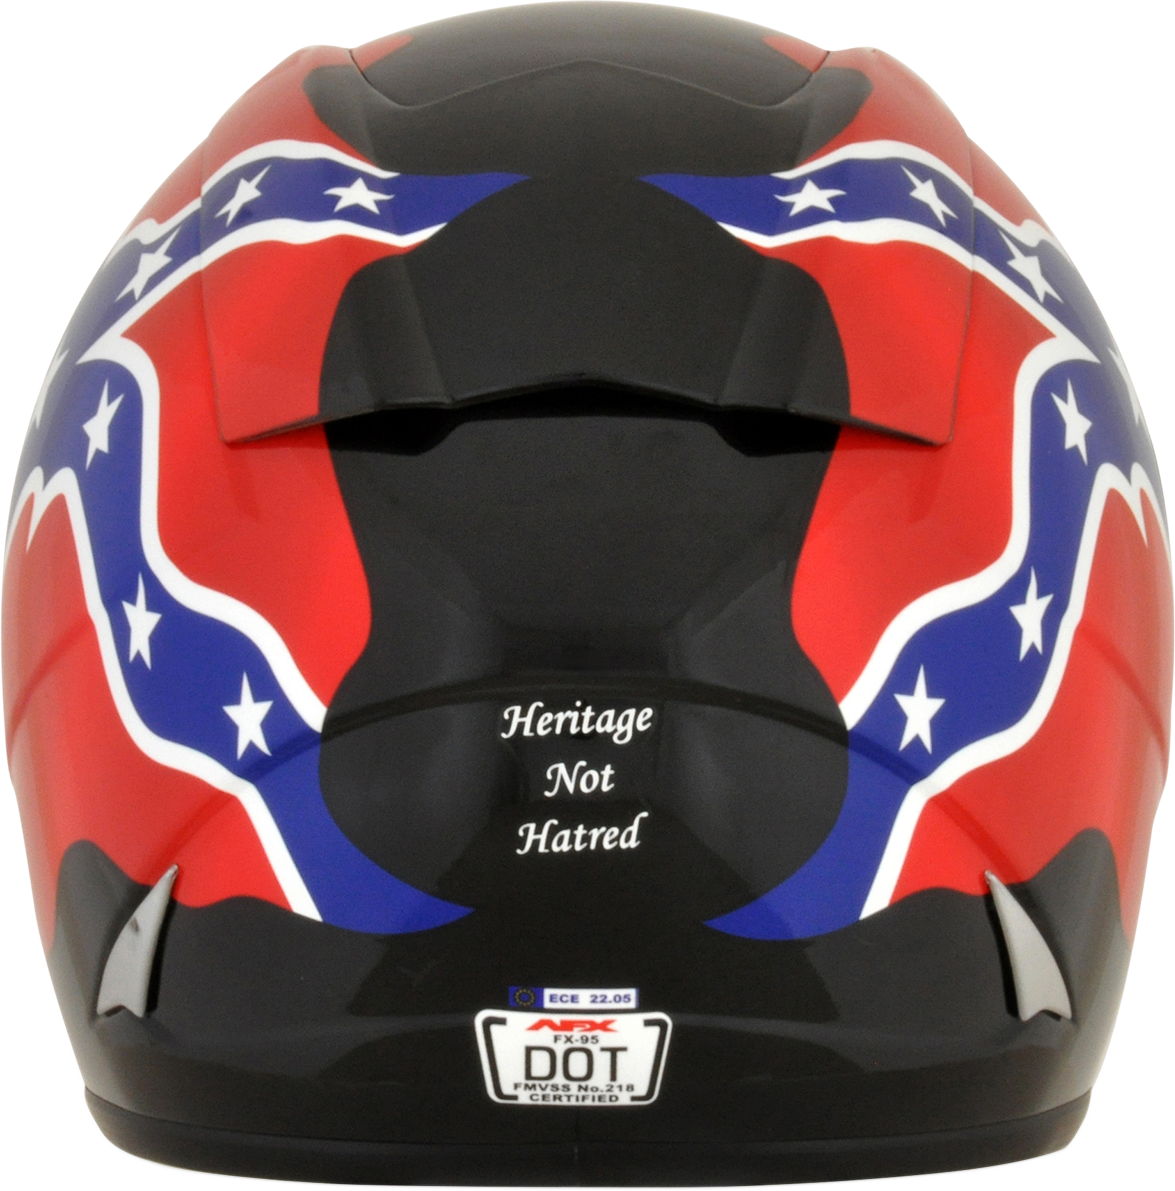 Rebel Flag Atv Helmet - About Flag Collections